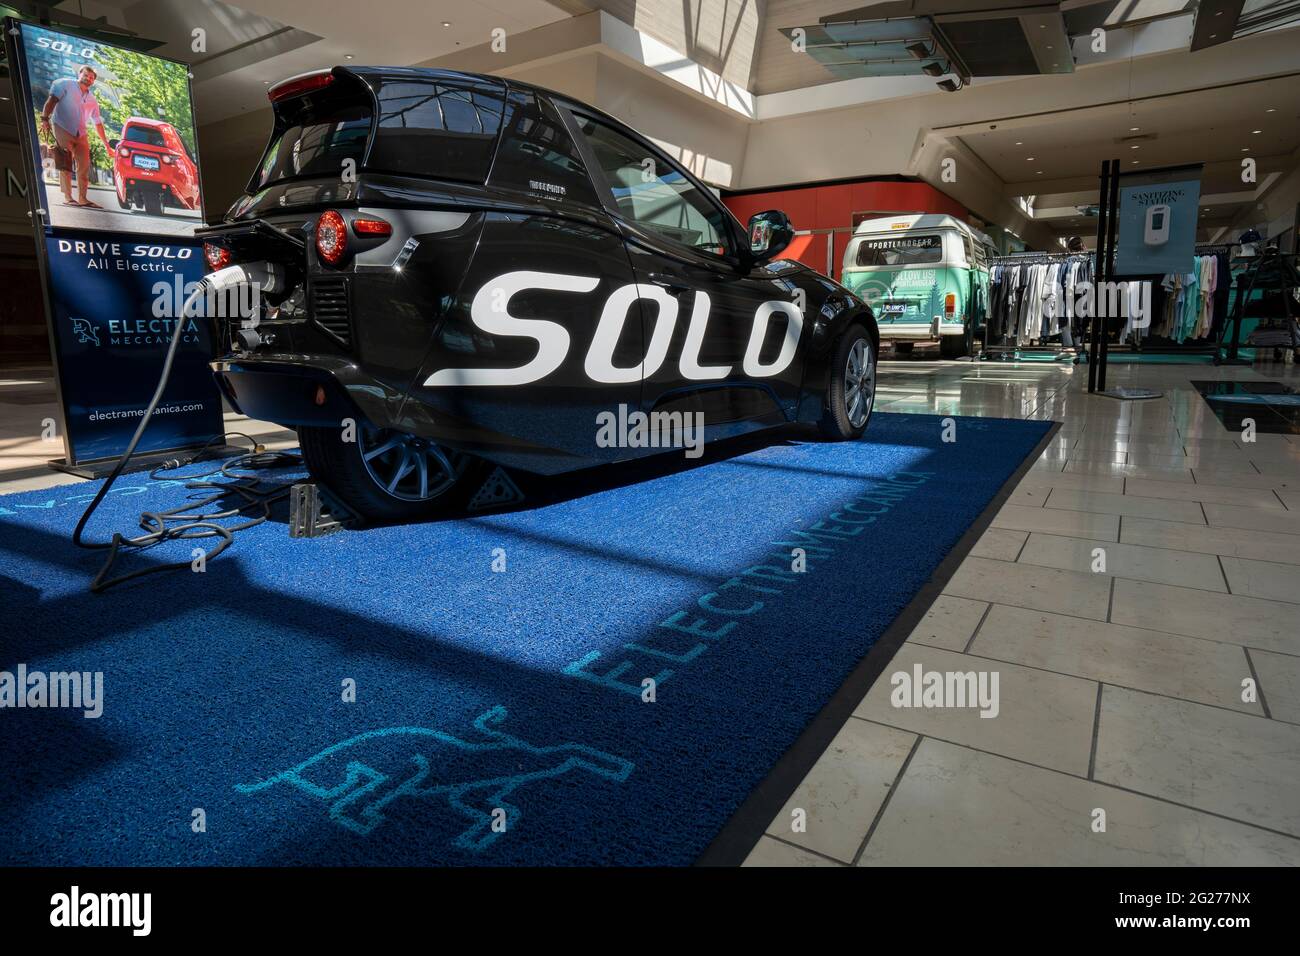 ElectraMeccanica Solo EV, a tiny three-wheeled electric car, is seen charging while on display in Washington Square Shopping Mall in Tigard, Oregon ... Stock Photo